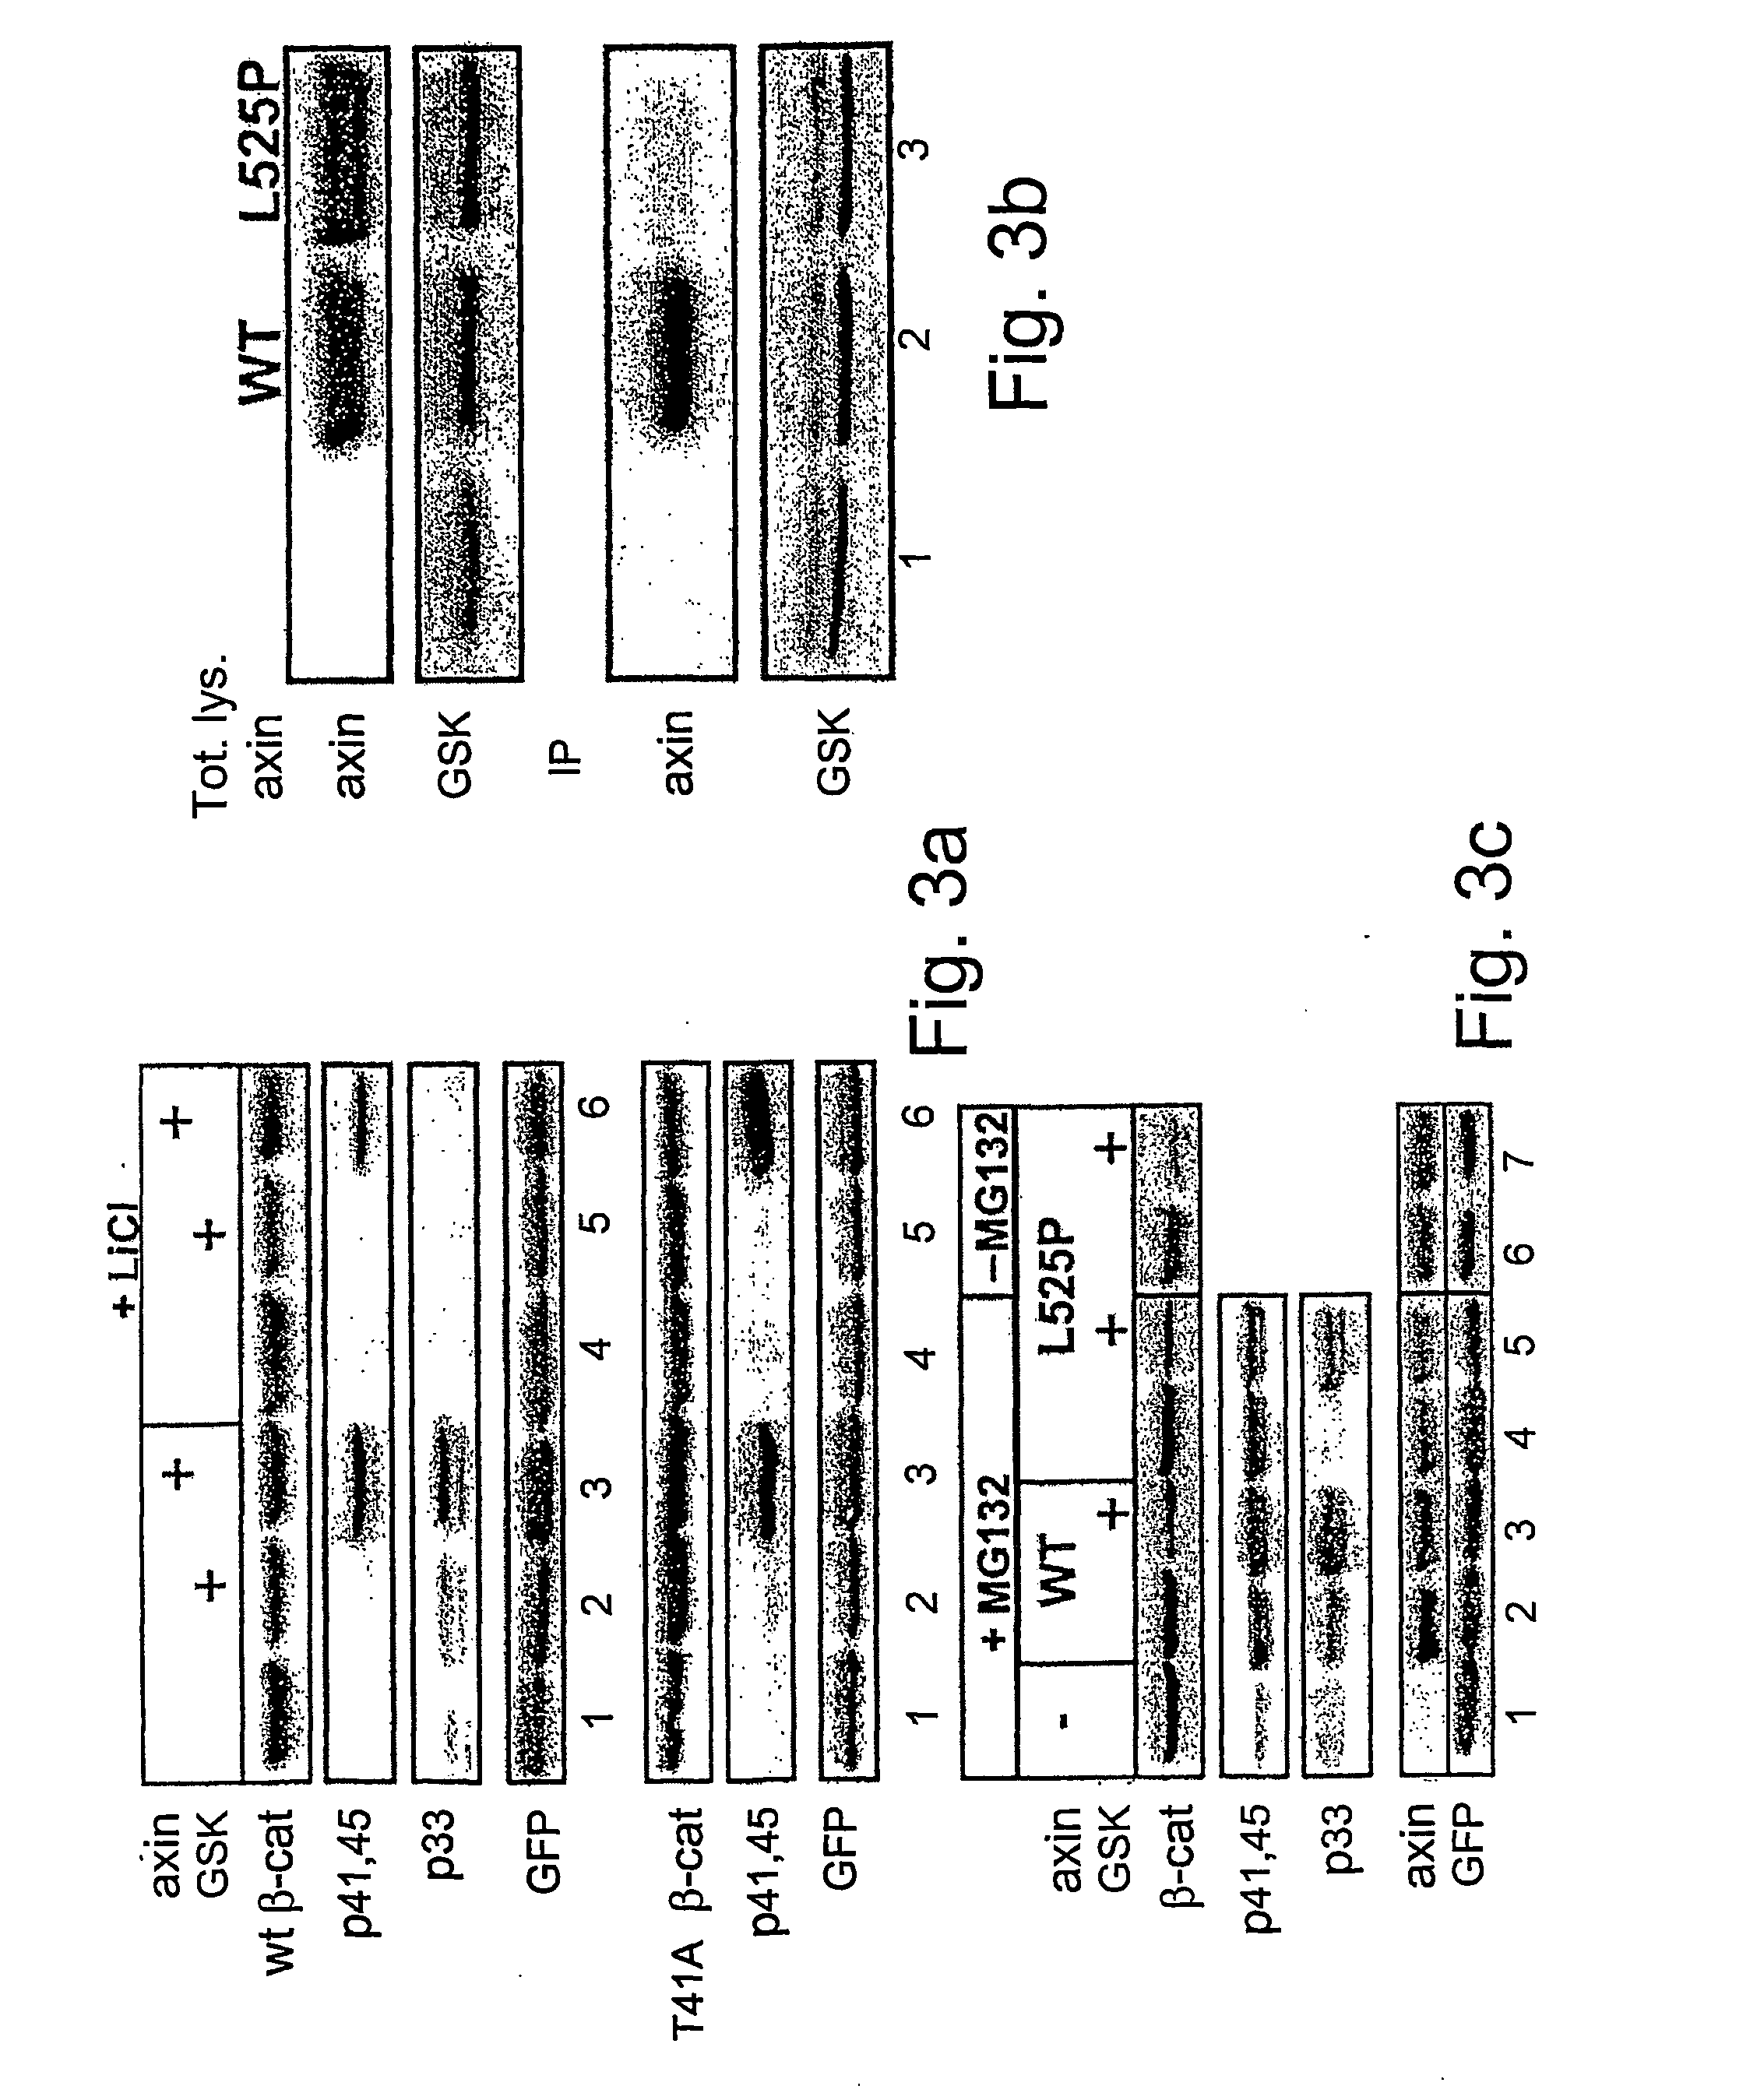 Methods and compositions for modulating beta-catenin phosphorylation